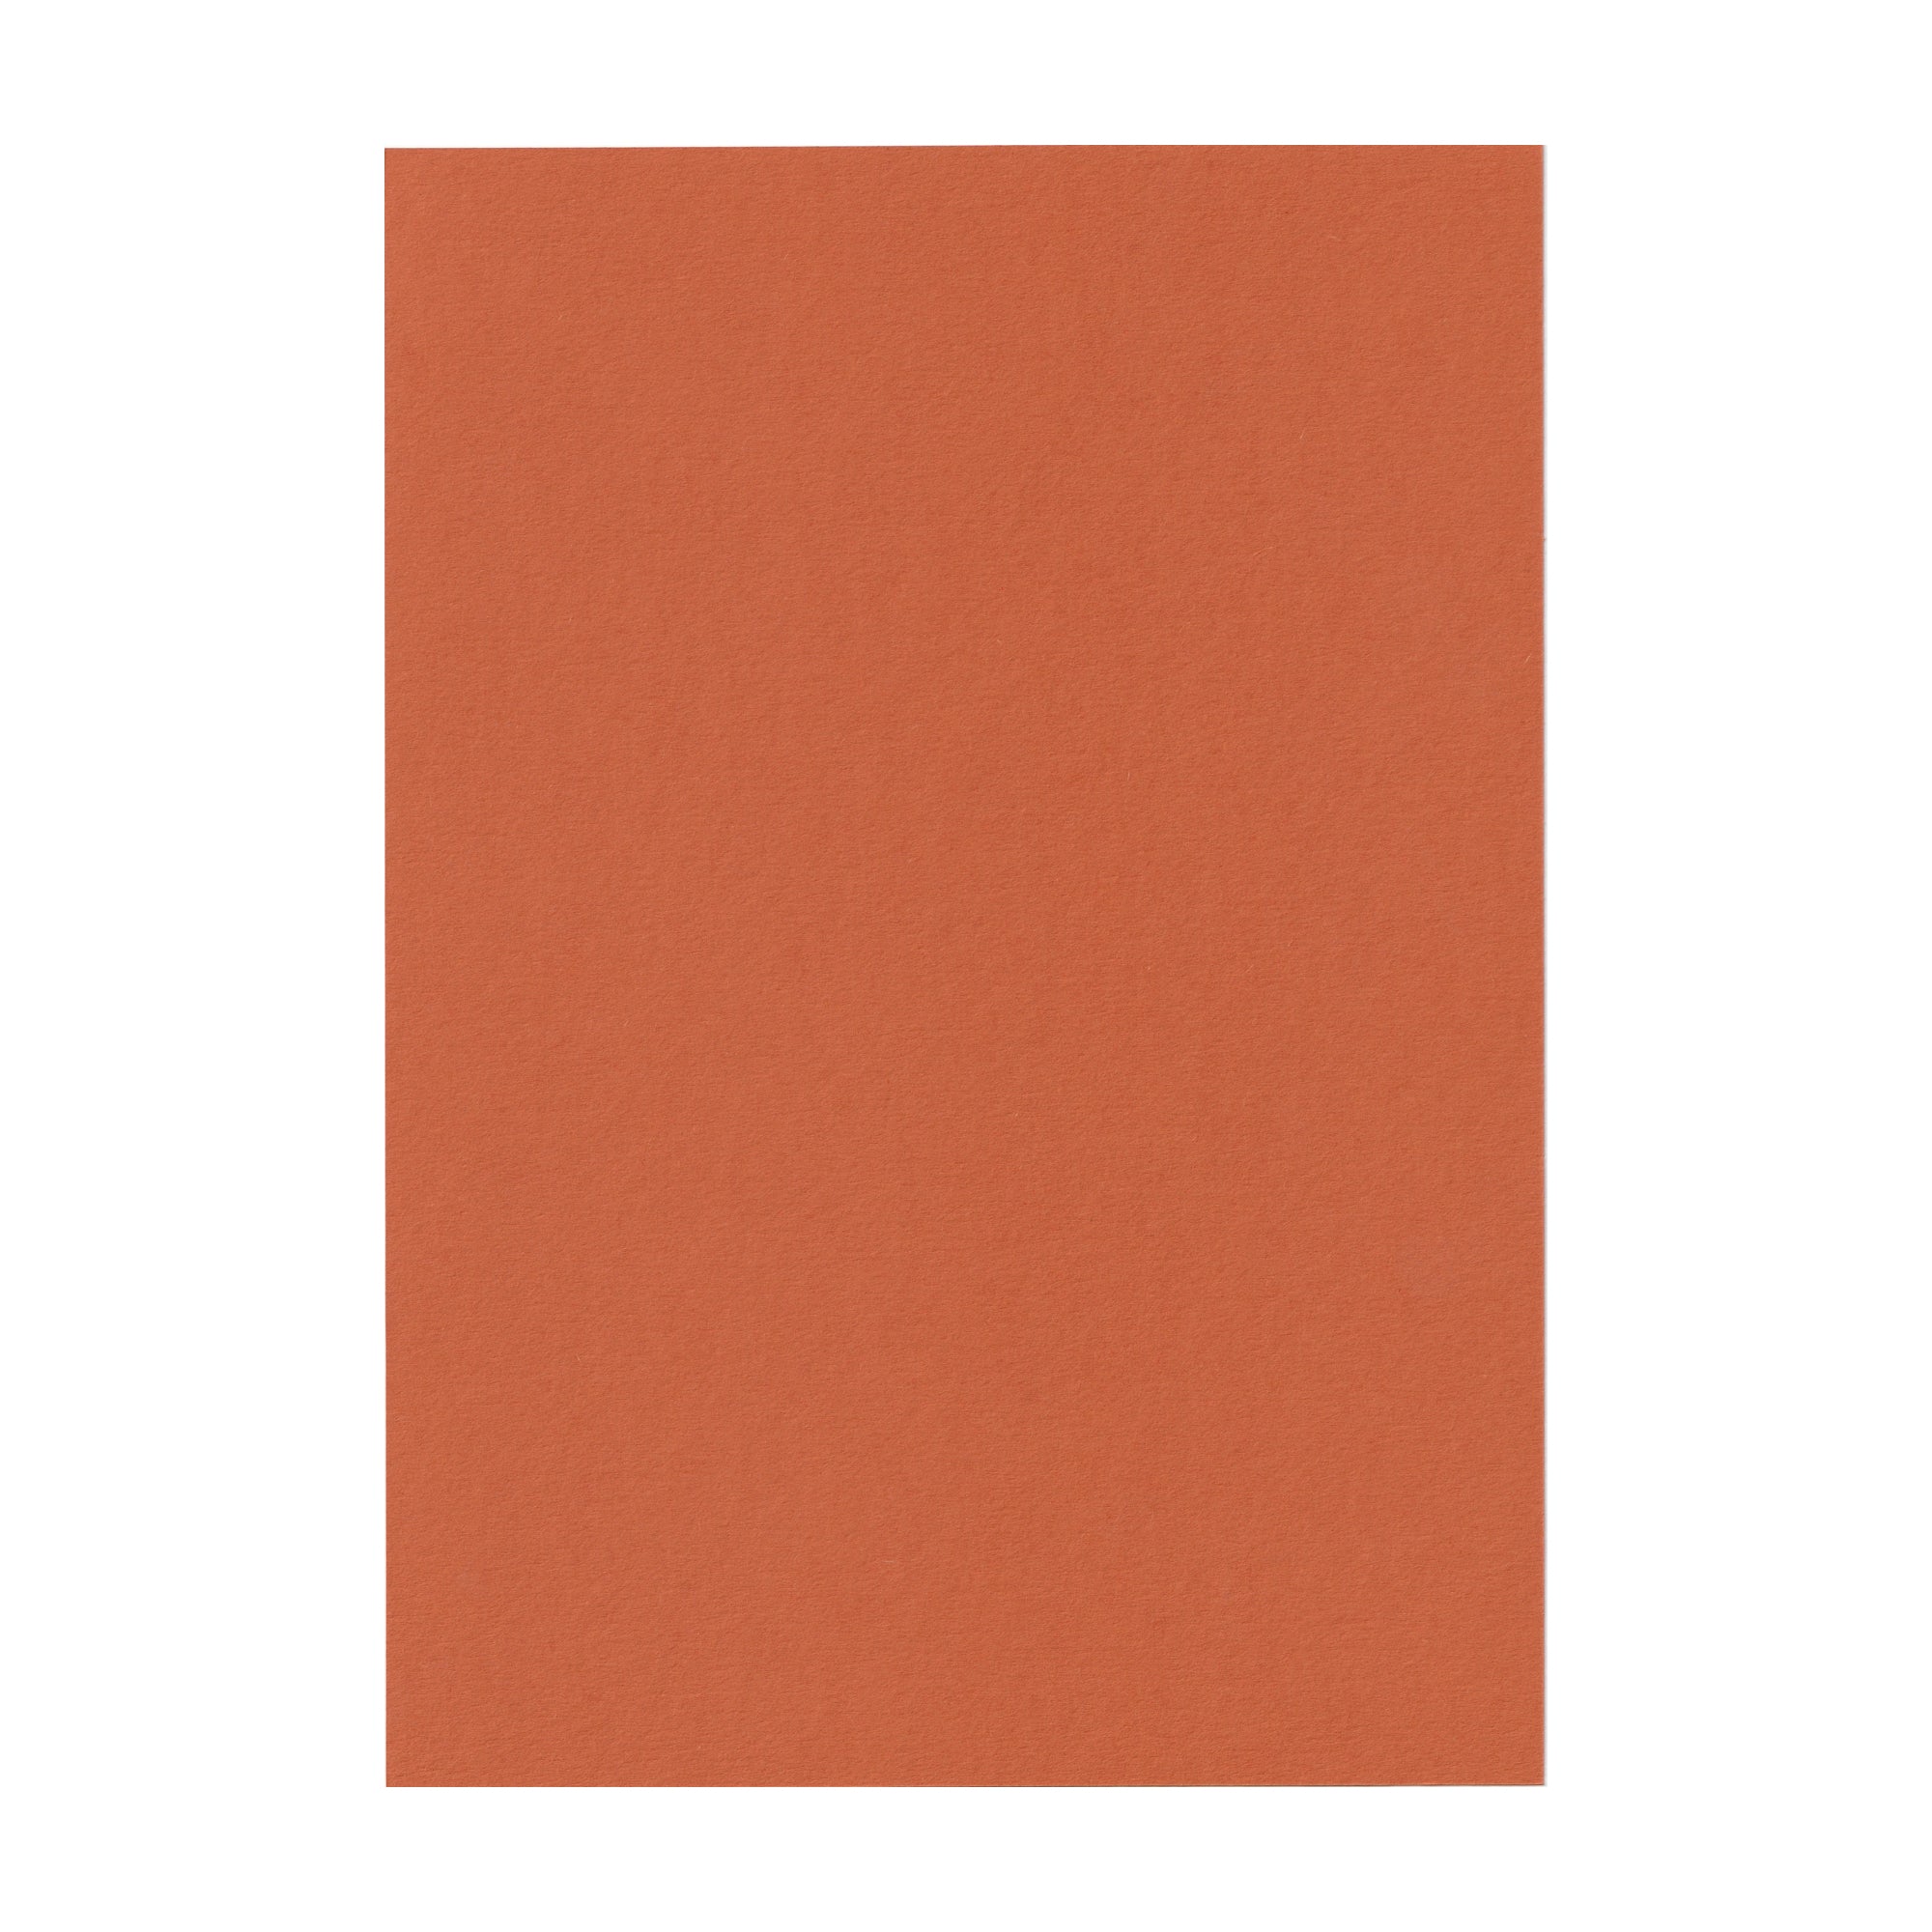 Plain Writing Paper in Russet